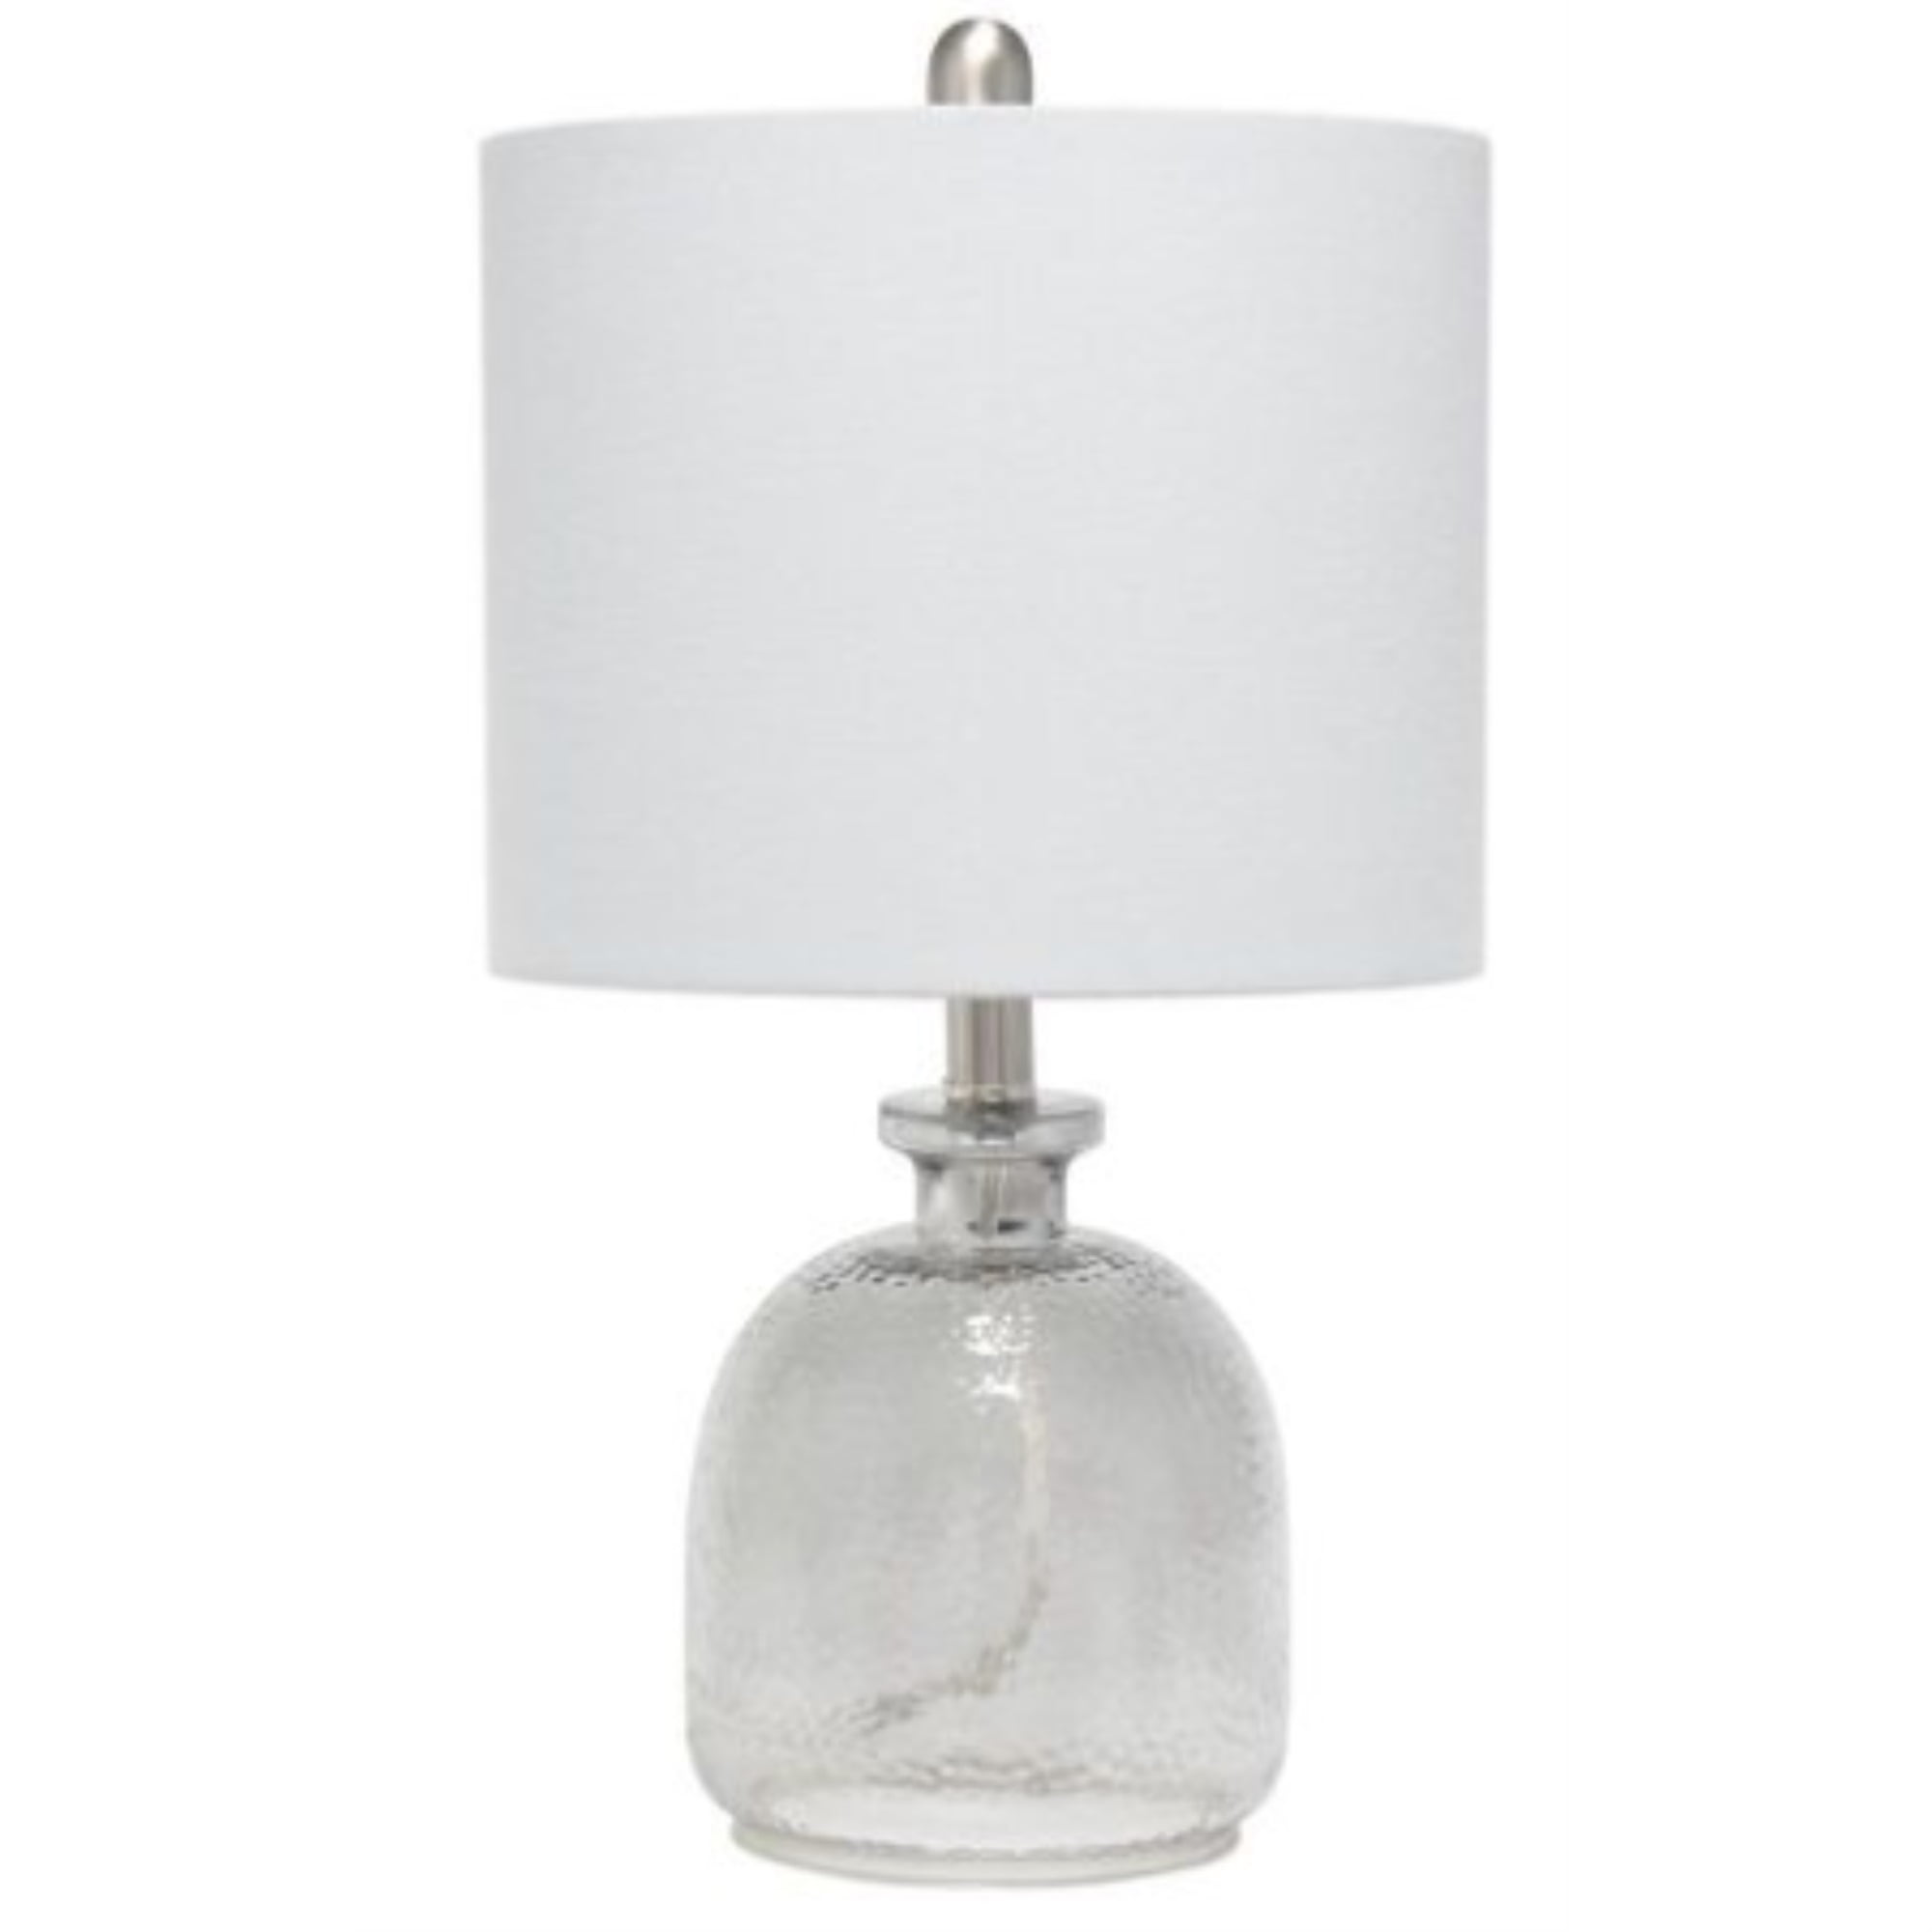 Lalia Home Smokey Gray Hammered Glass Jar Table Lamp with Gray Linen Shade